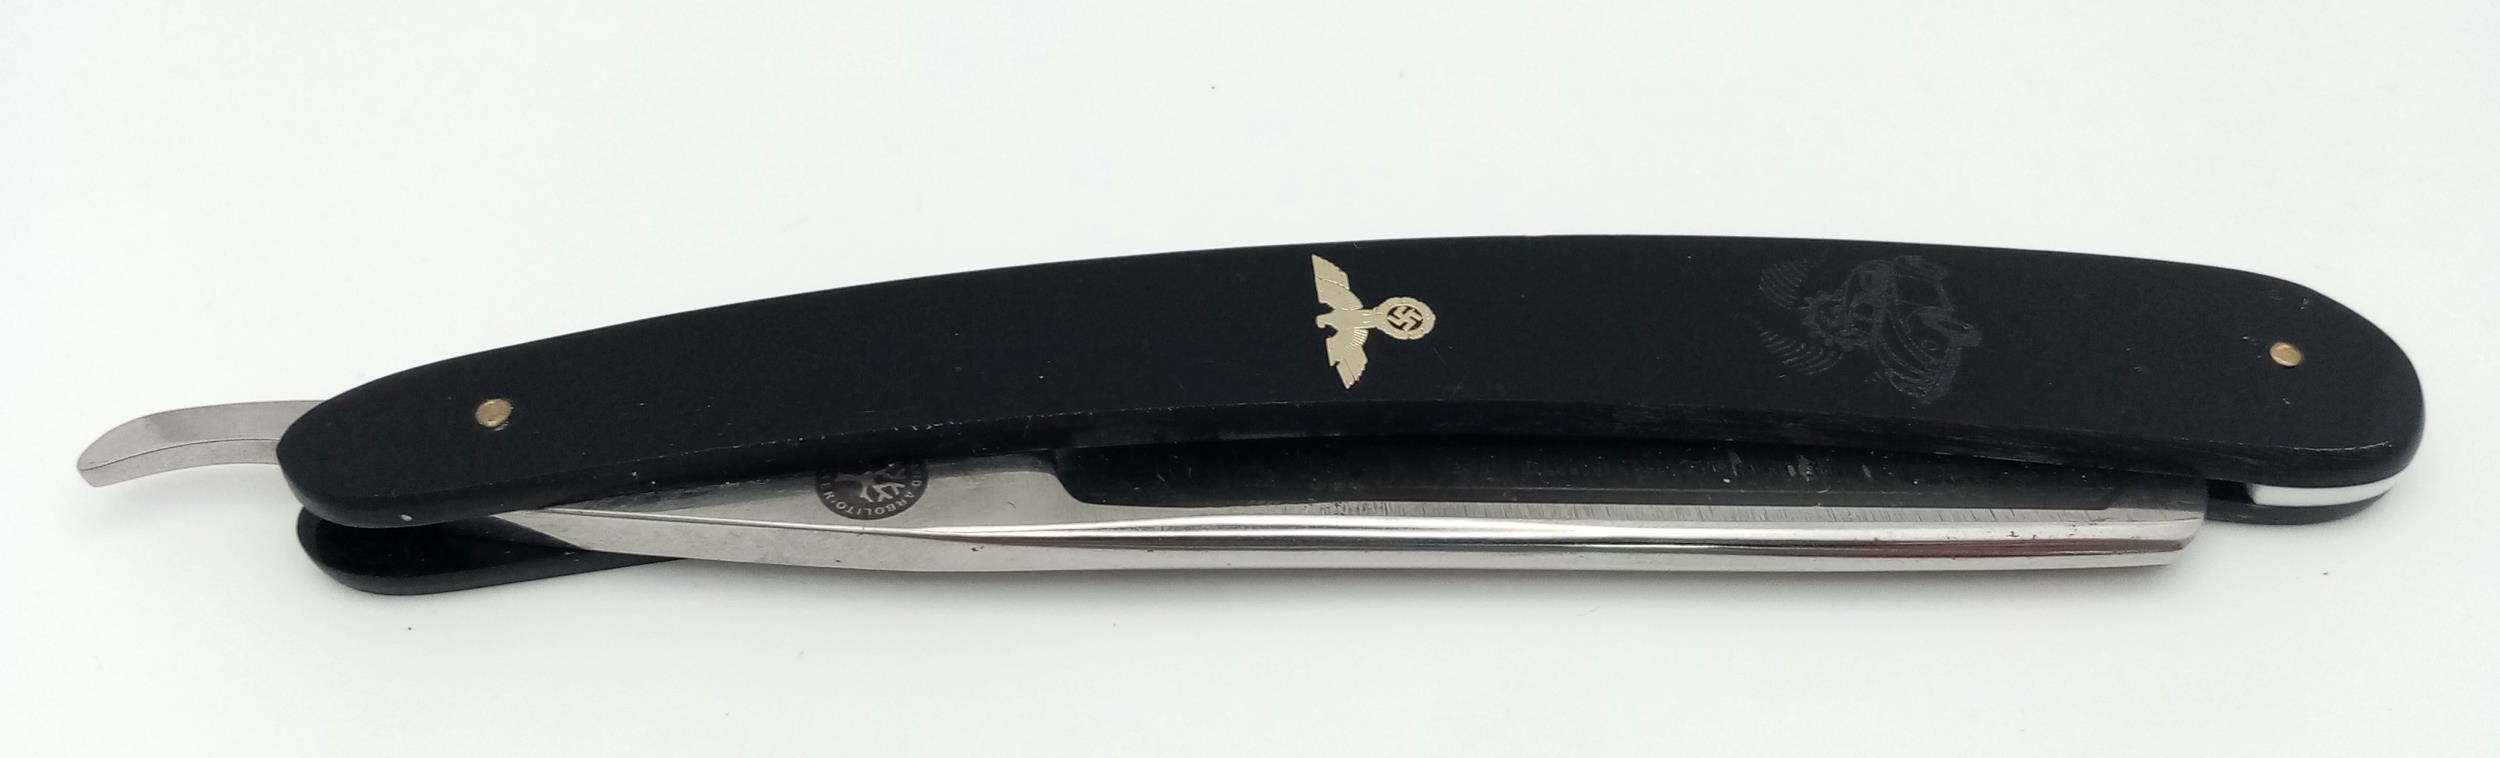 3rd Reich Patriotic Cut Throat Razor. Blade has been etched “Made from steel from the Volks Wagen - Image 6 of 6